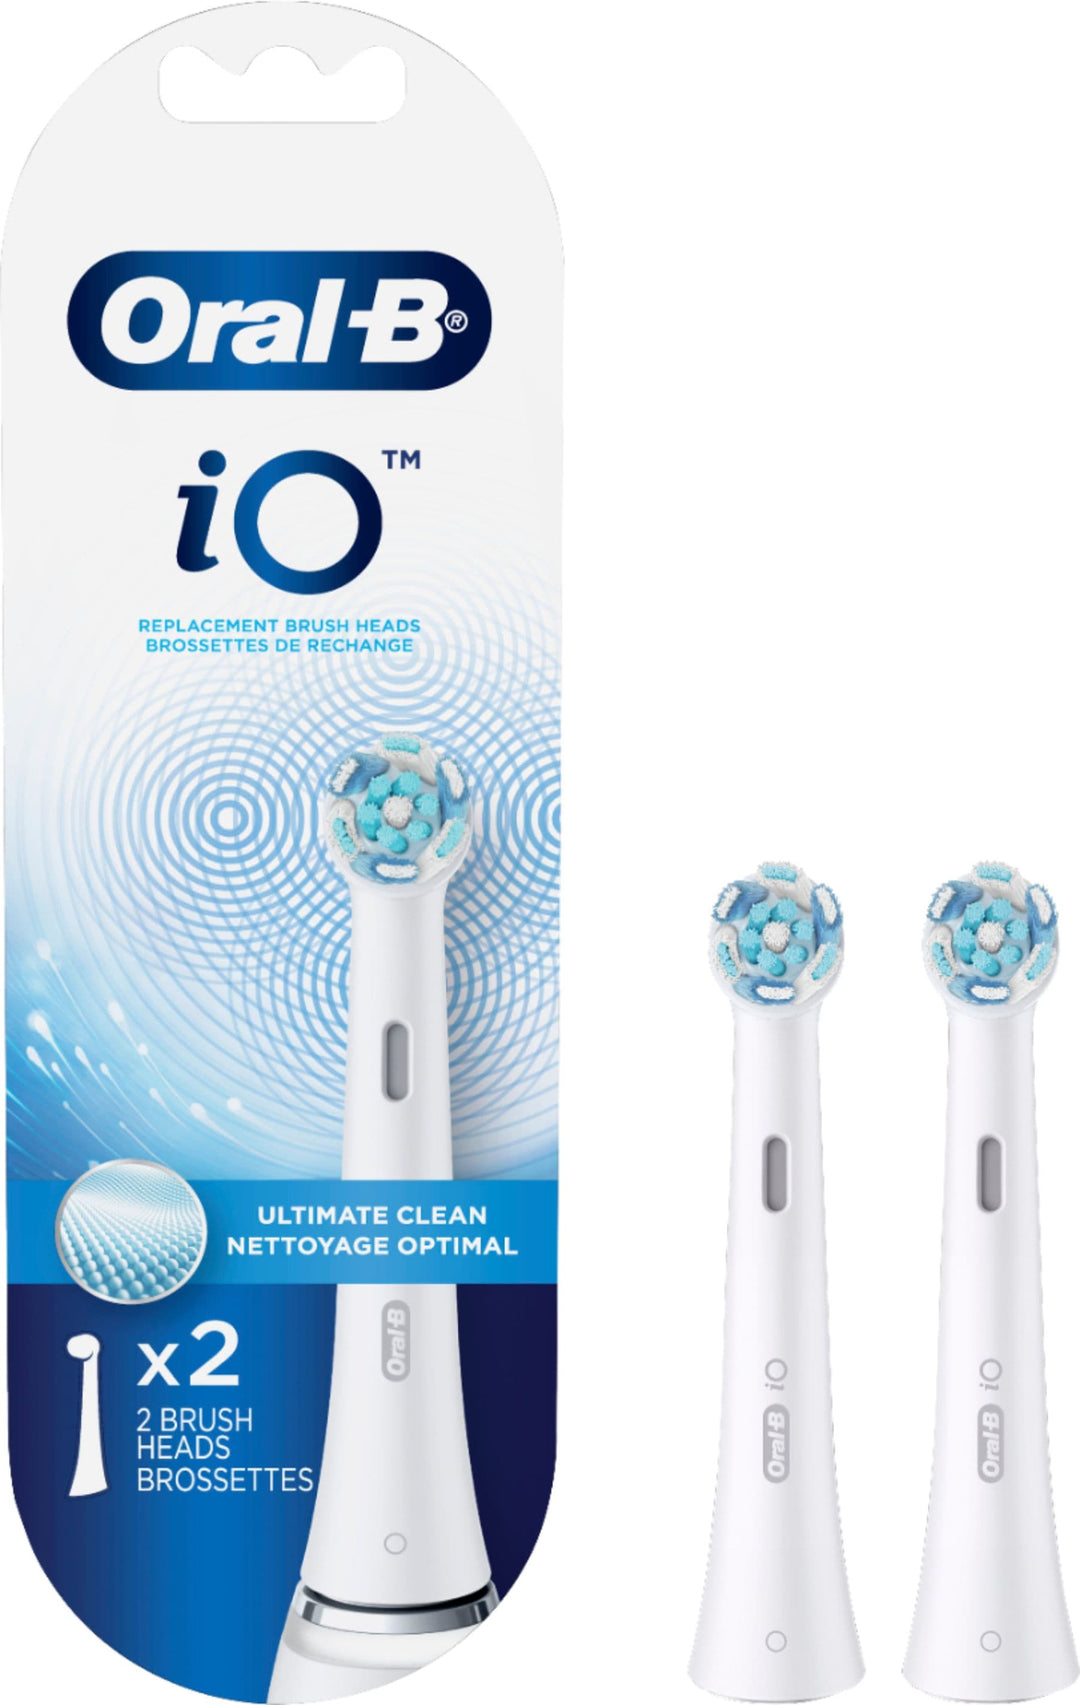 iO Series Ultimate Clean Replacement Brush Head for Oral-B iO Series Electric Toothbrushes (2-Count) - White_1